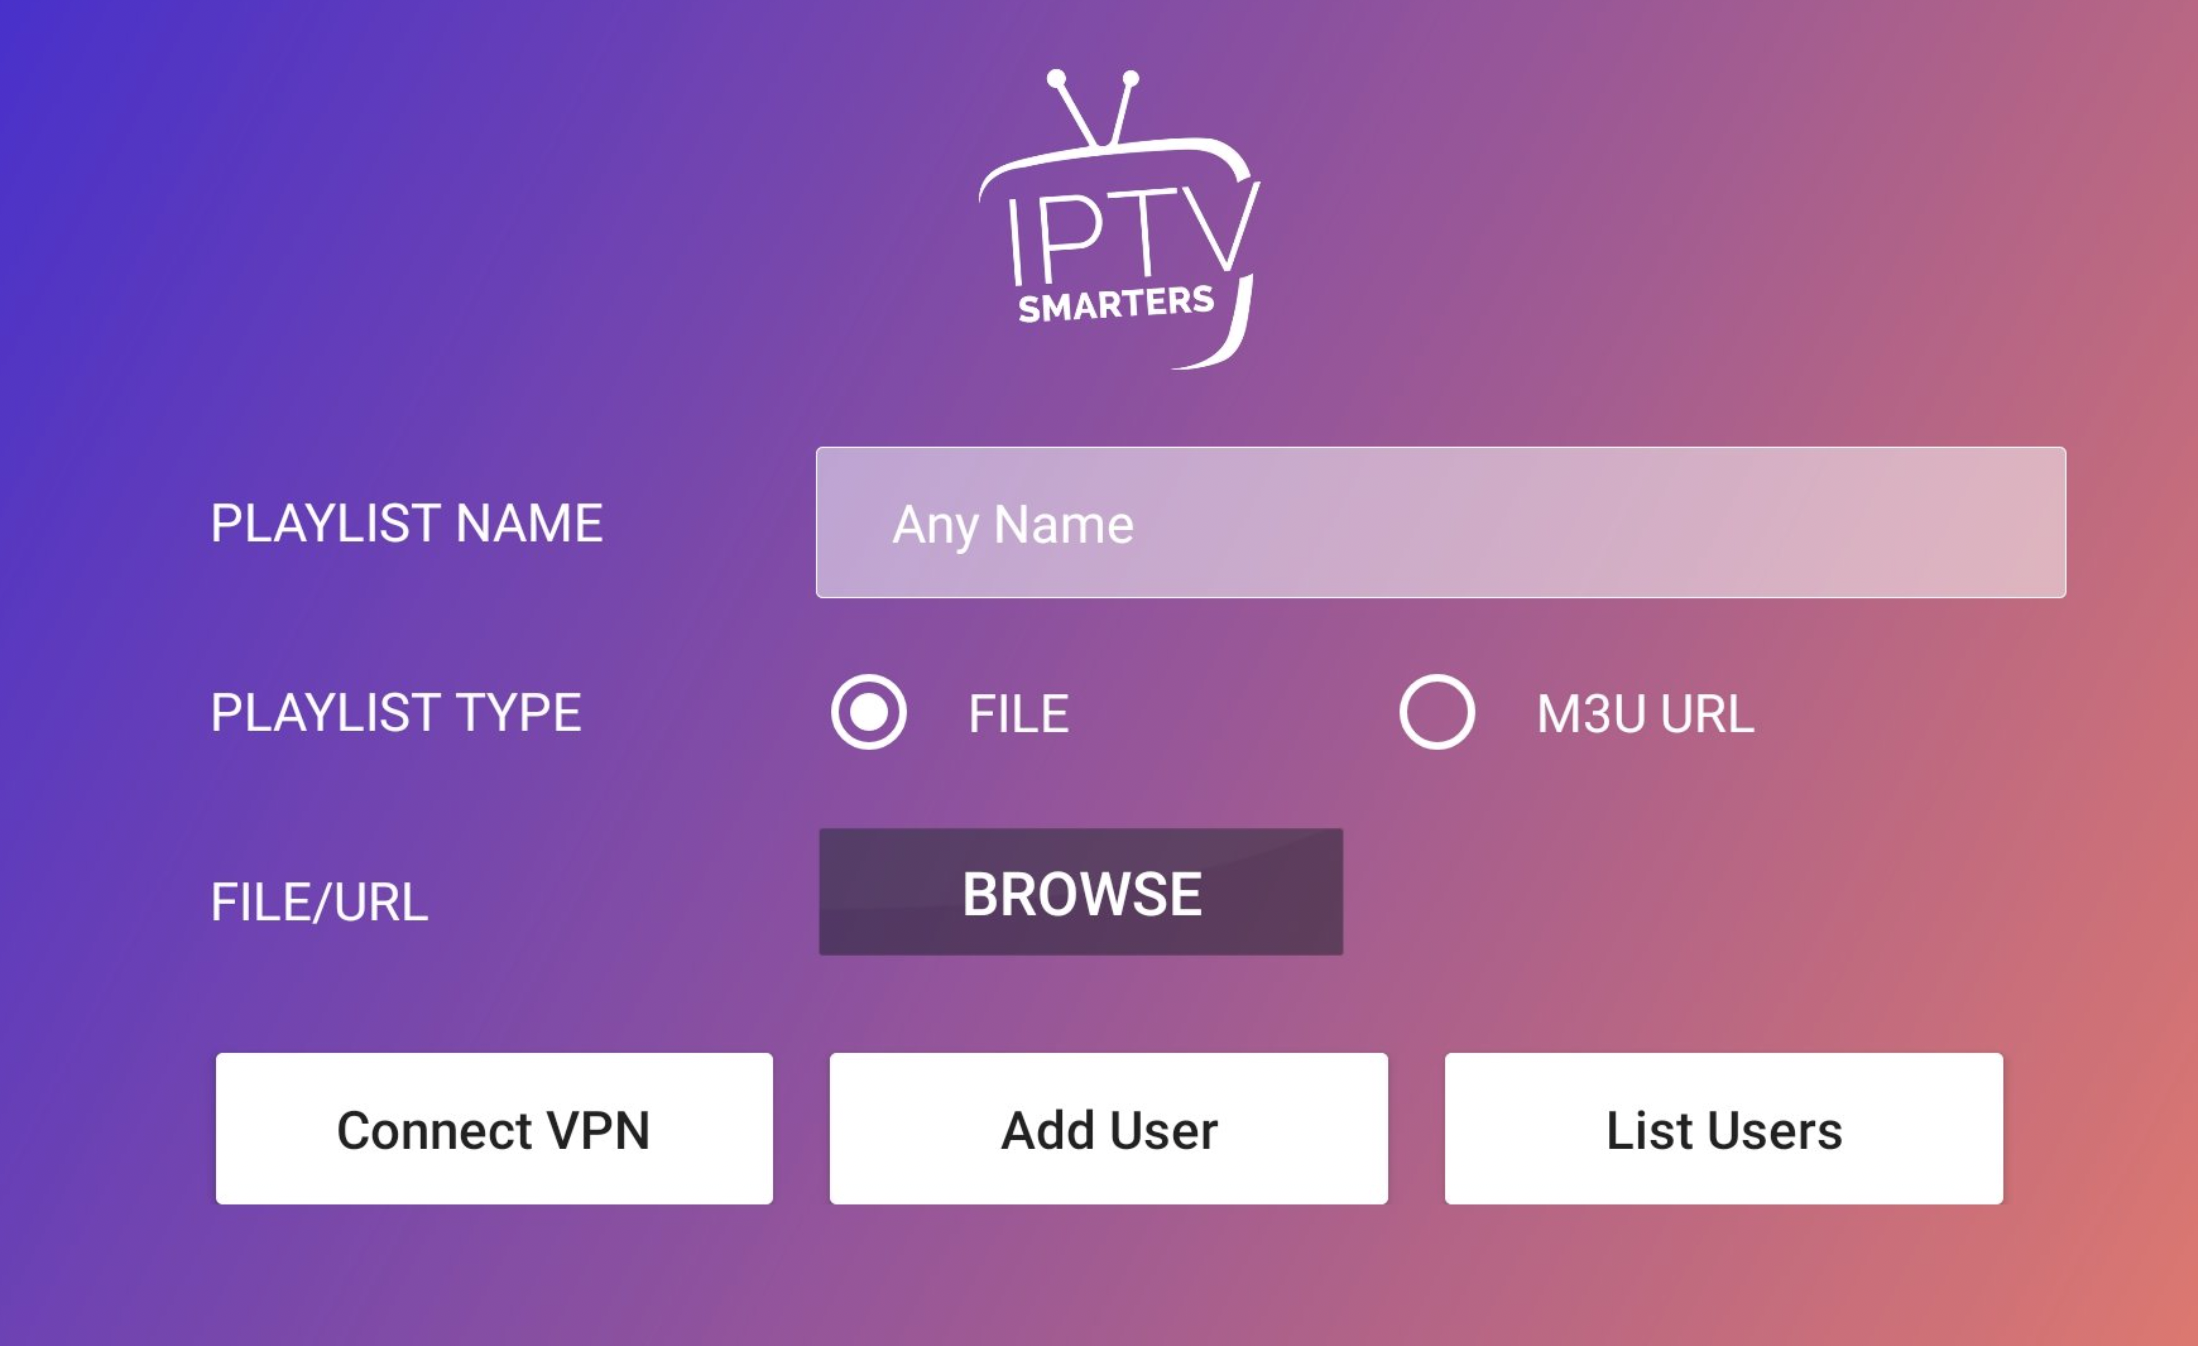 IPTV Smarters Pro Lite APK Installed on Android